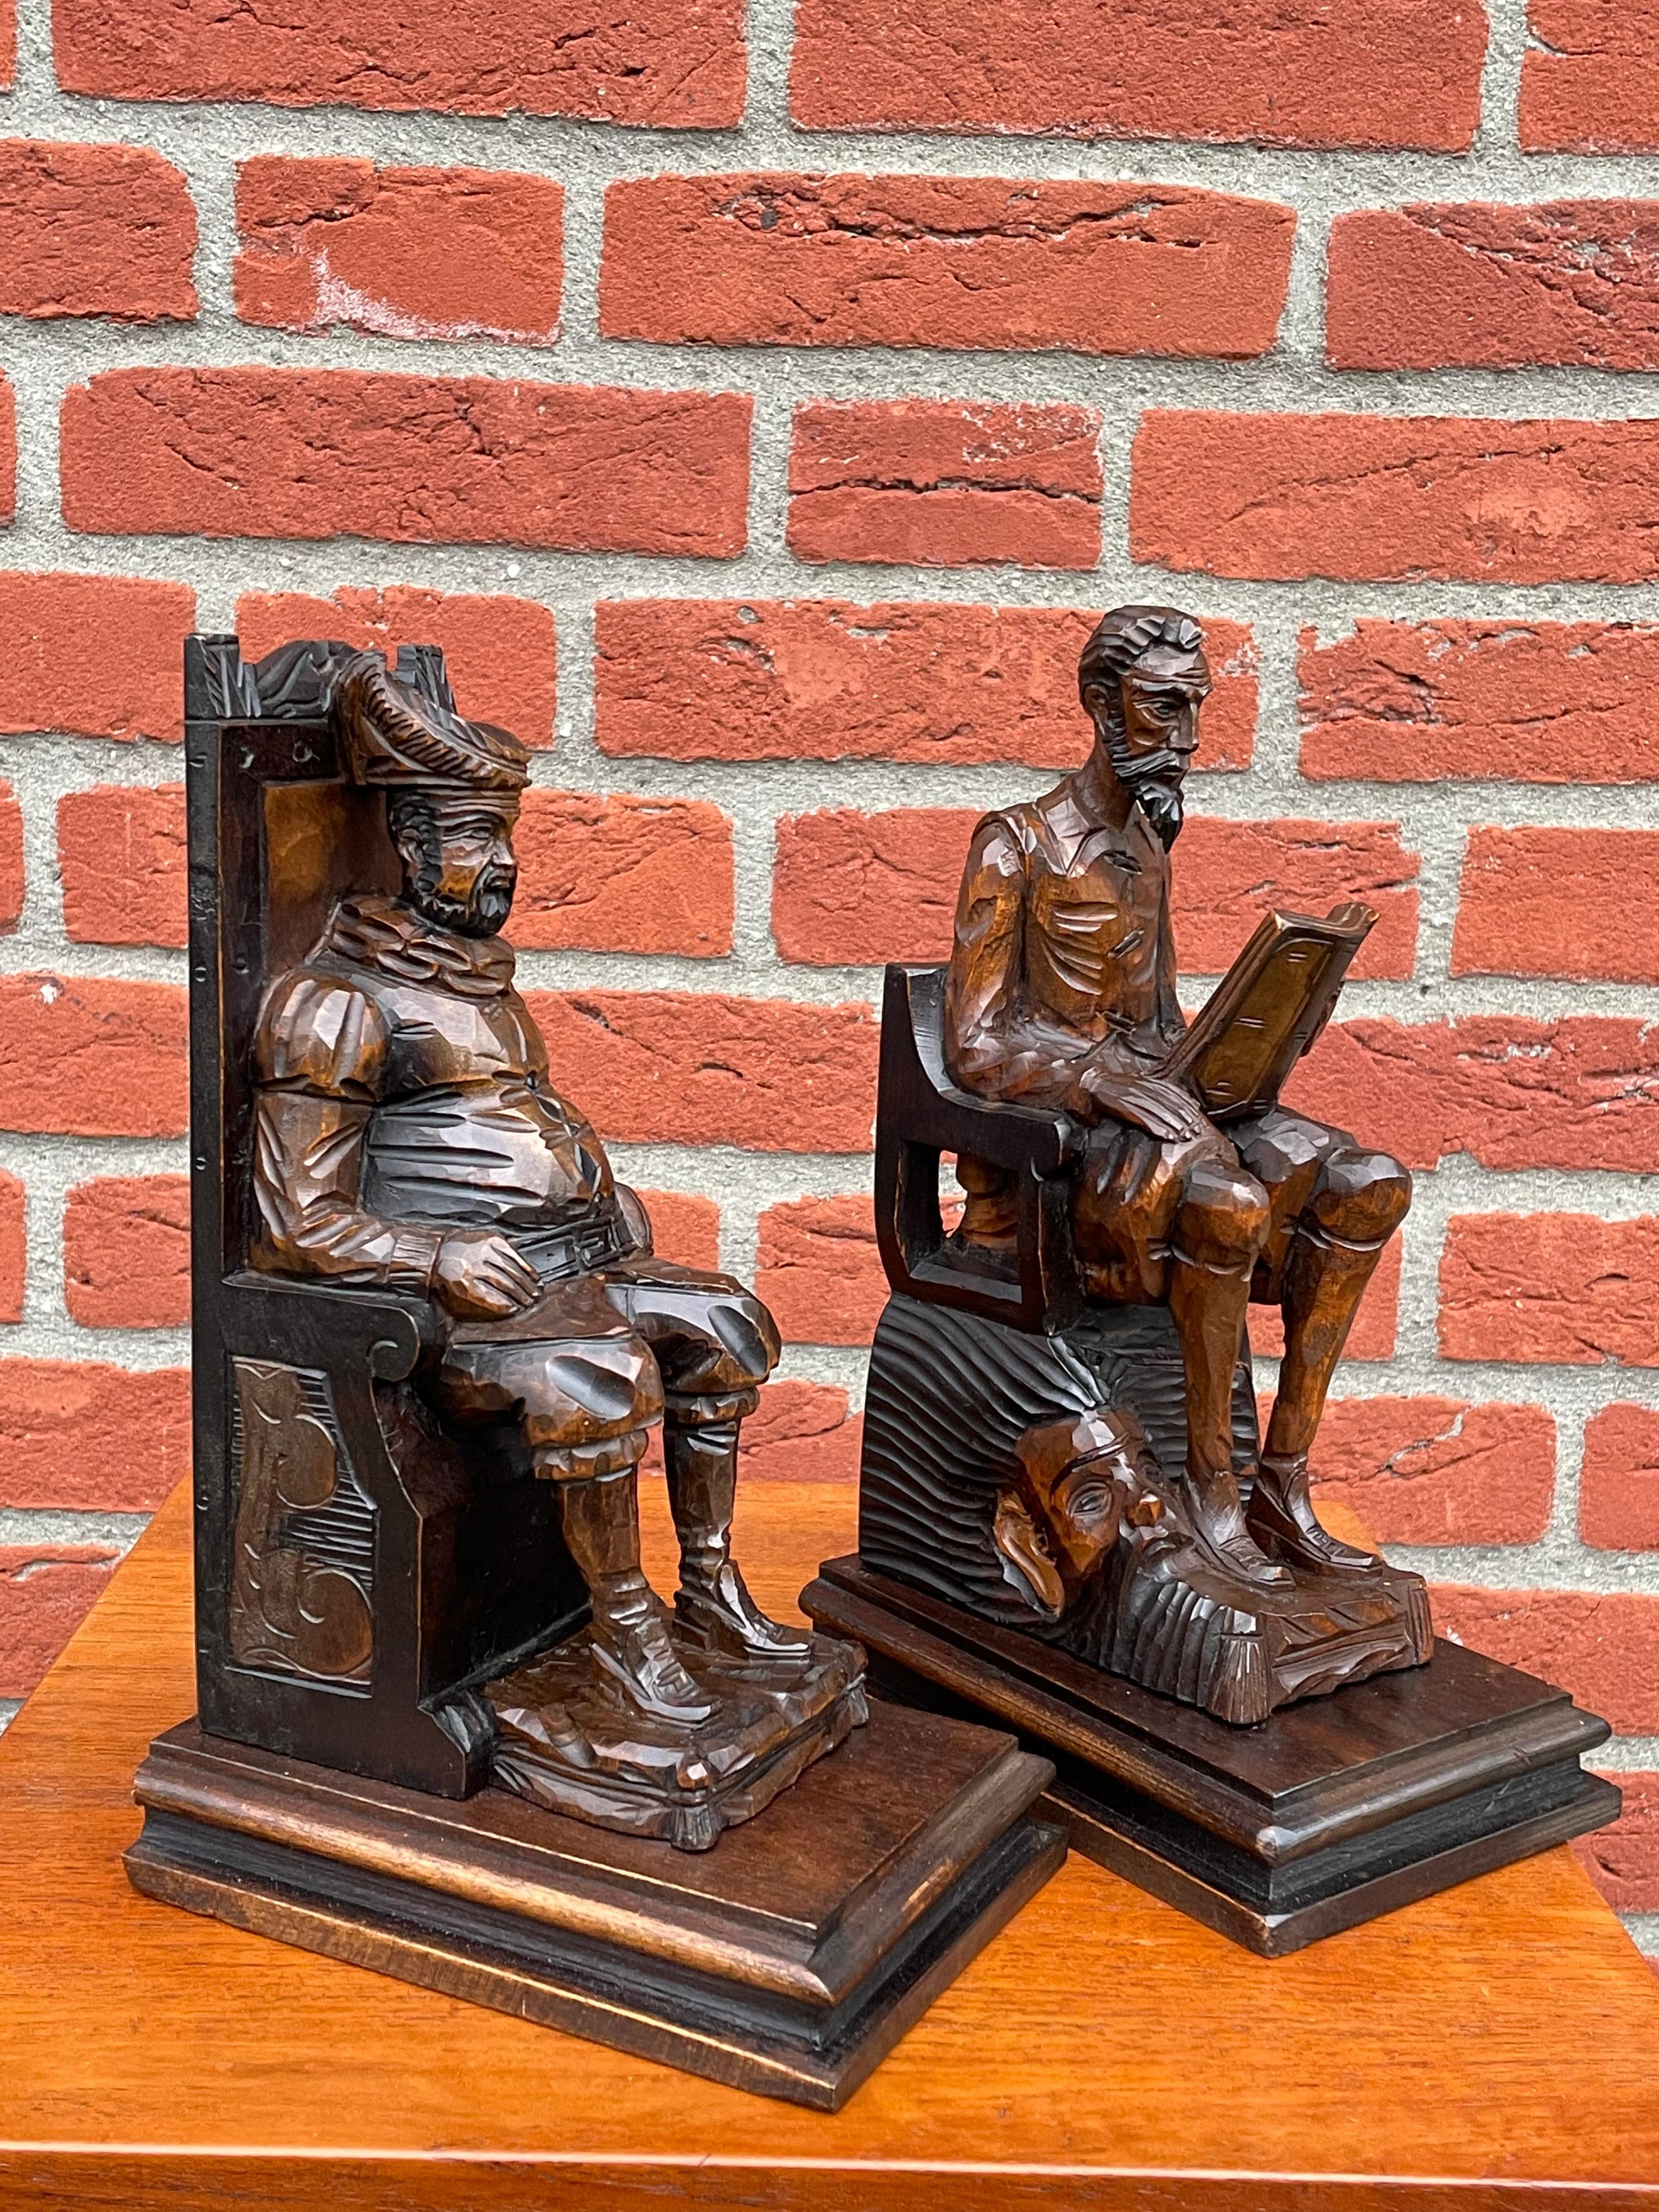 Blackened Near Antique Hand Carved Wooden Don Quixote and Sancho Panza Sculpture Bookends